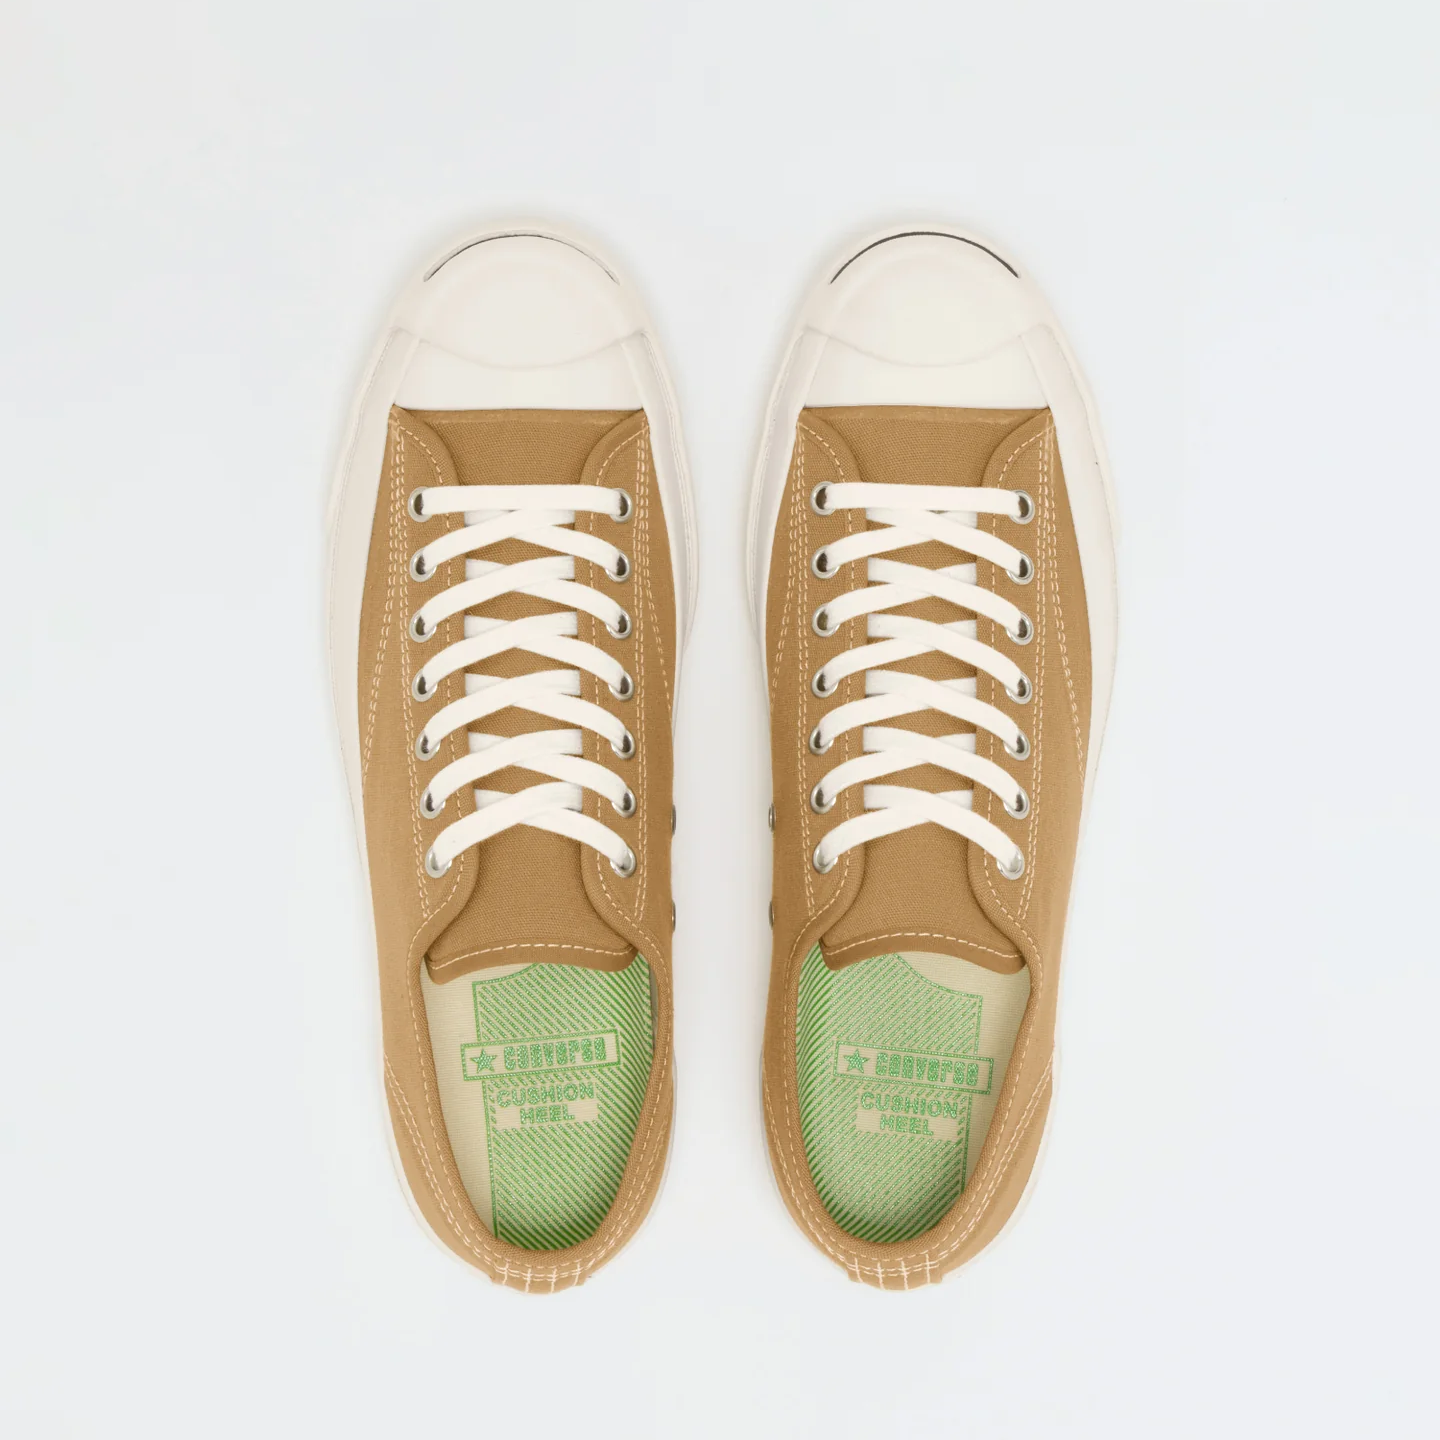 JACK PURCELL CANVAS - CAMEL